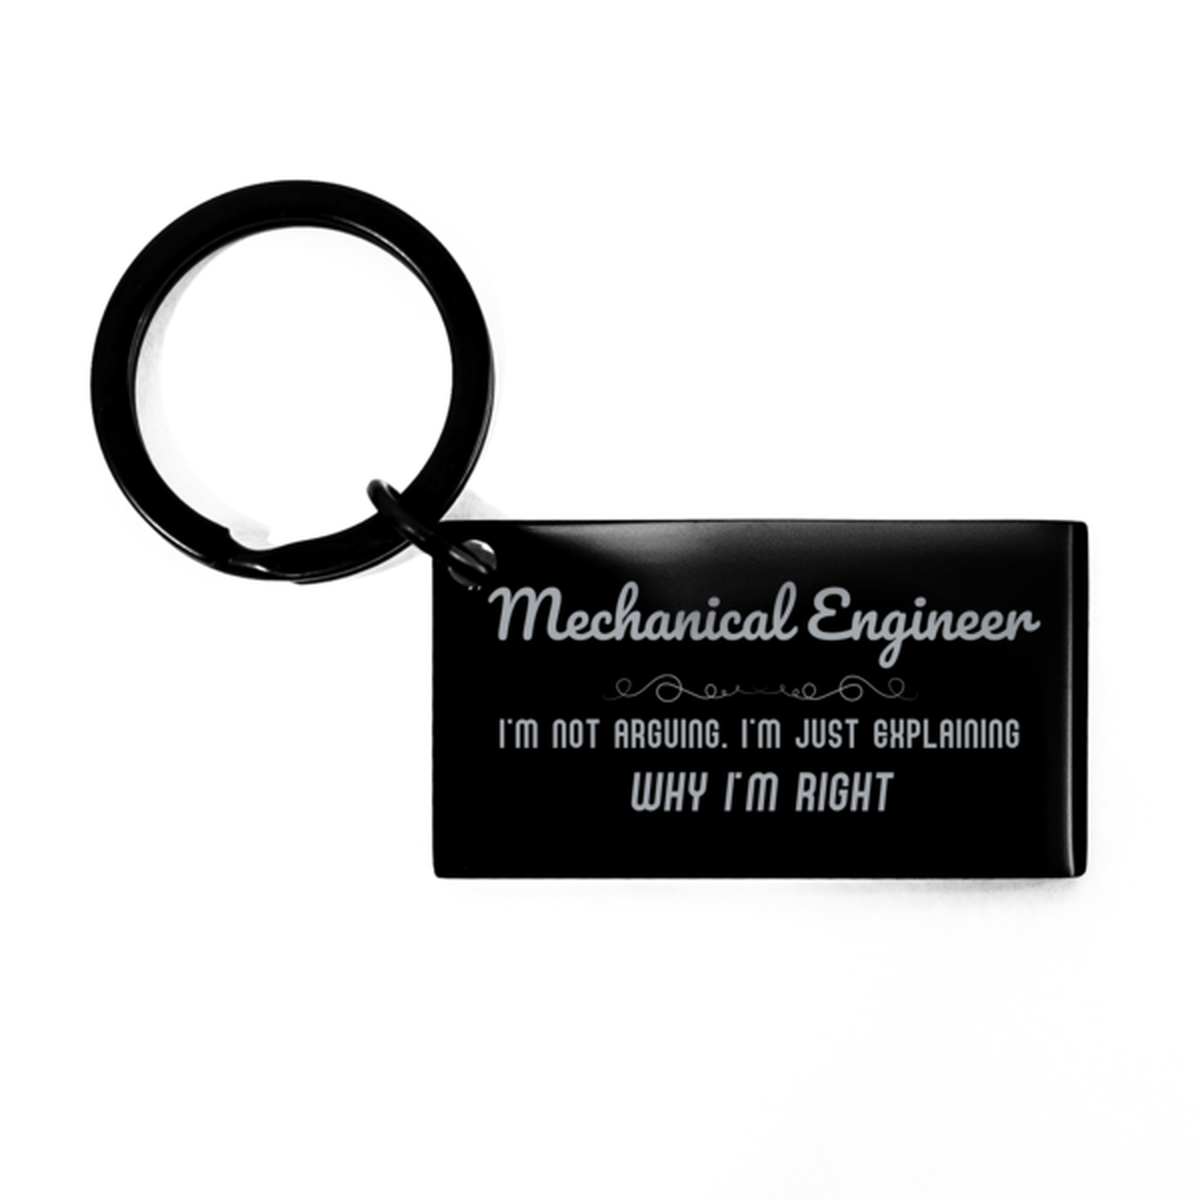 Mechanical Engineer I'm not Arguing. I'm Just Explaining Why I'm RIGHT Keychain, Funny Saying Quote Mechanical Engineer Gifts For Mechanical Engineer Graduation Birthday Christmas Gifts for Men Women Coworker